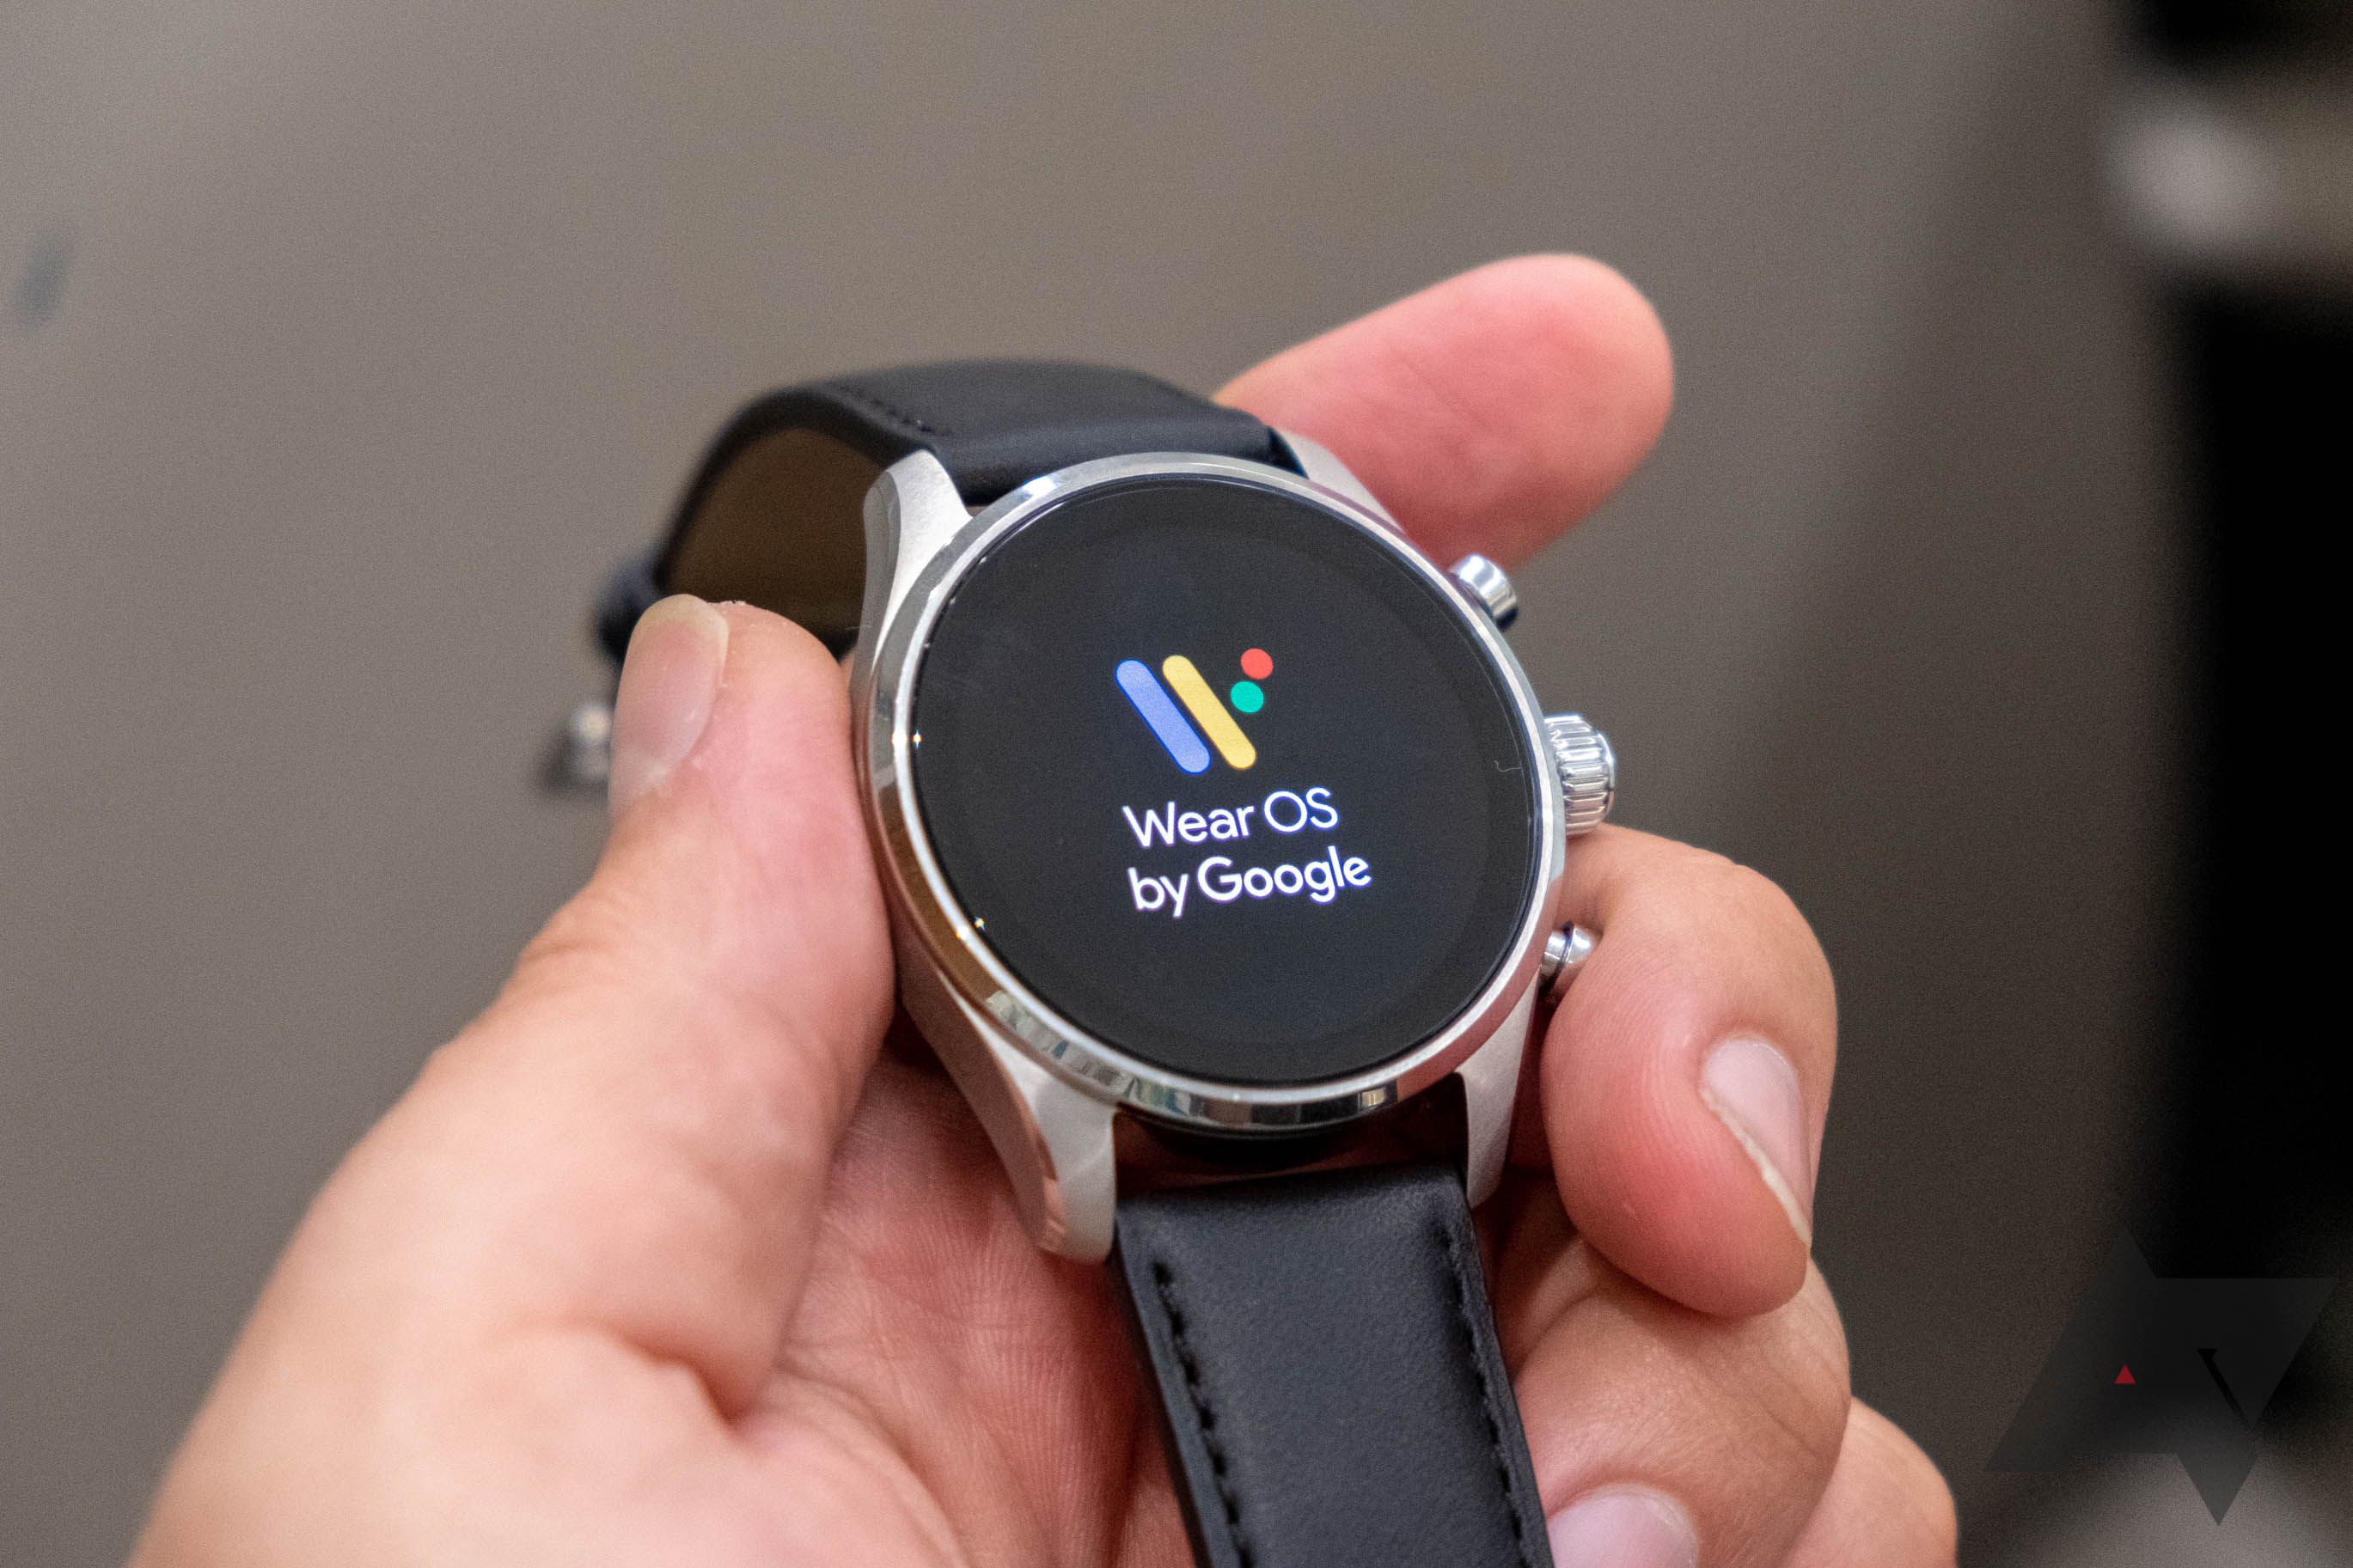 A hand holding a Montblanc Summit 3 WearOS watch with the WearOS by Google words and logo on the face